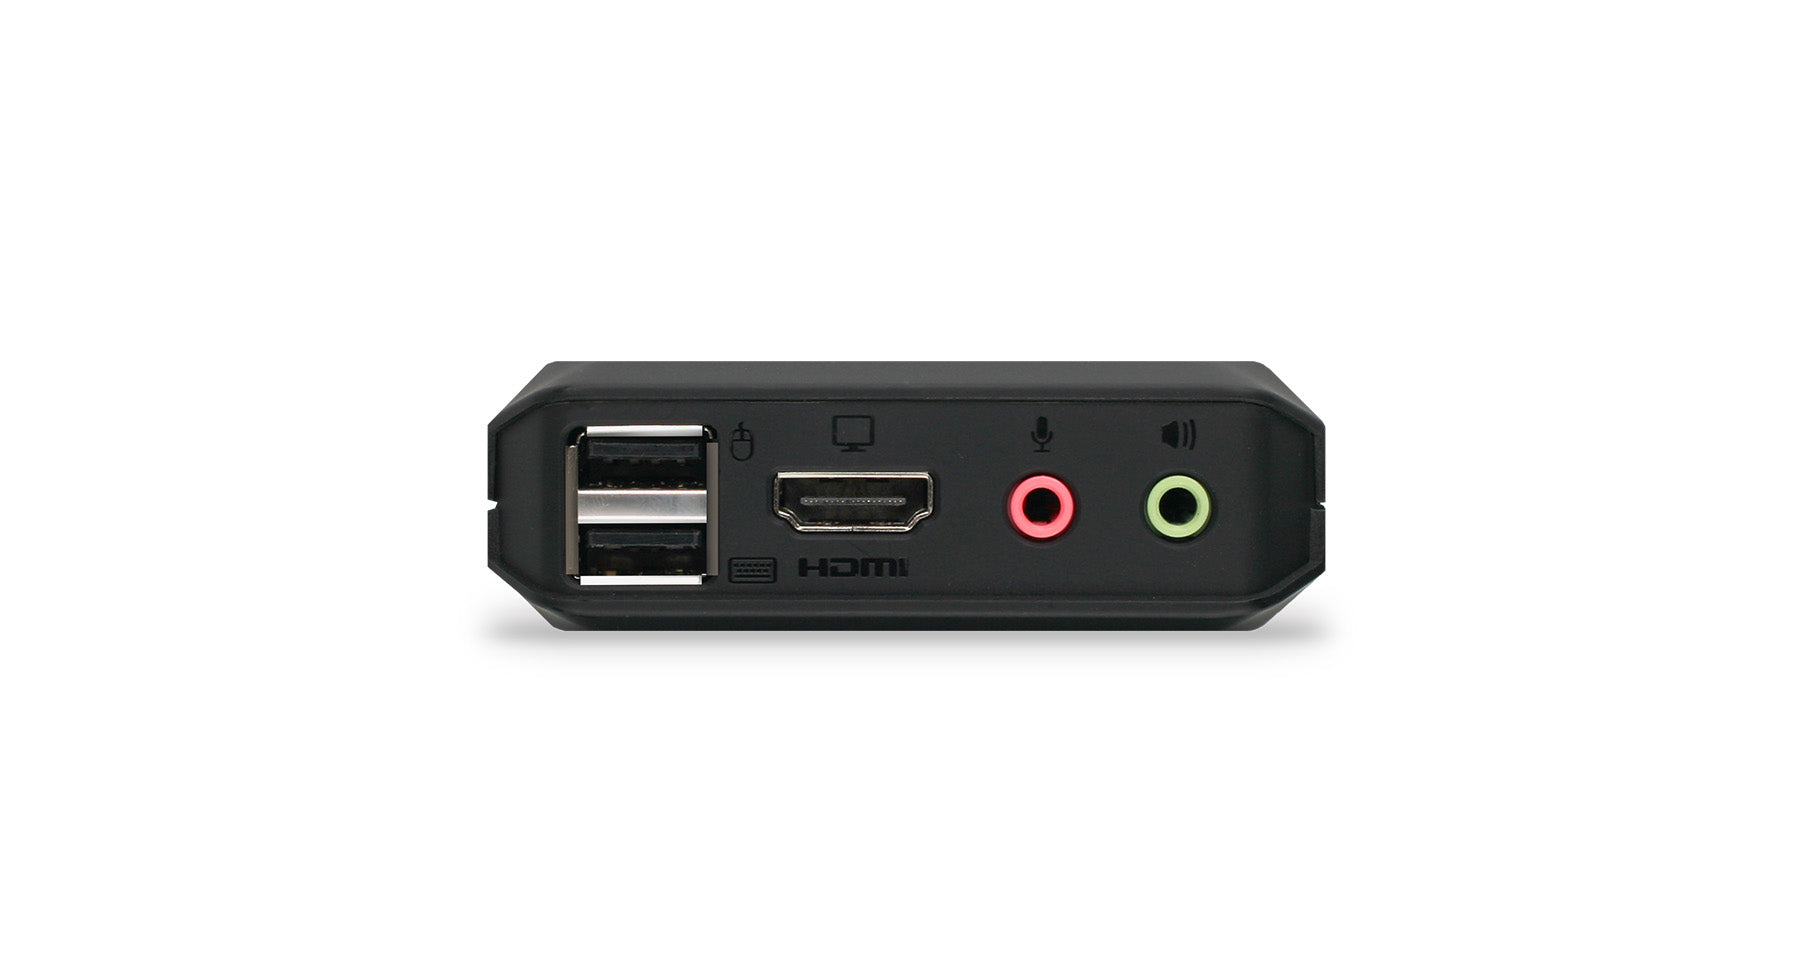 2-Port 4K KVM Switch with HDMI, USB and Audio Connections